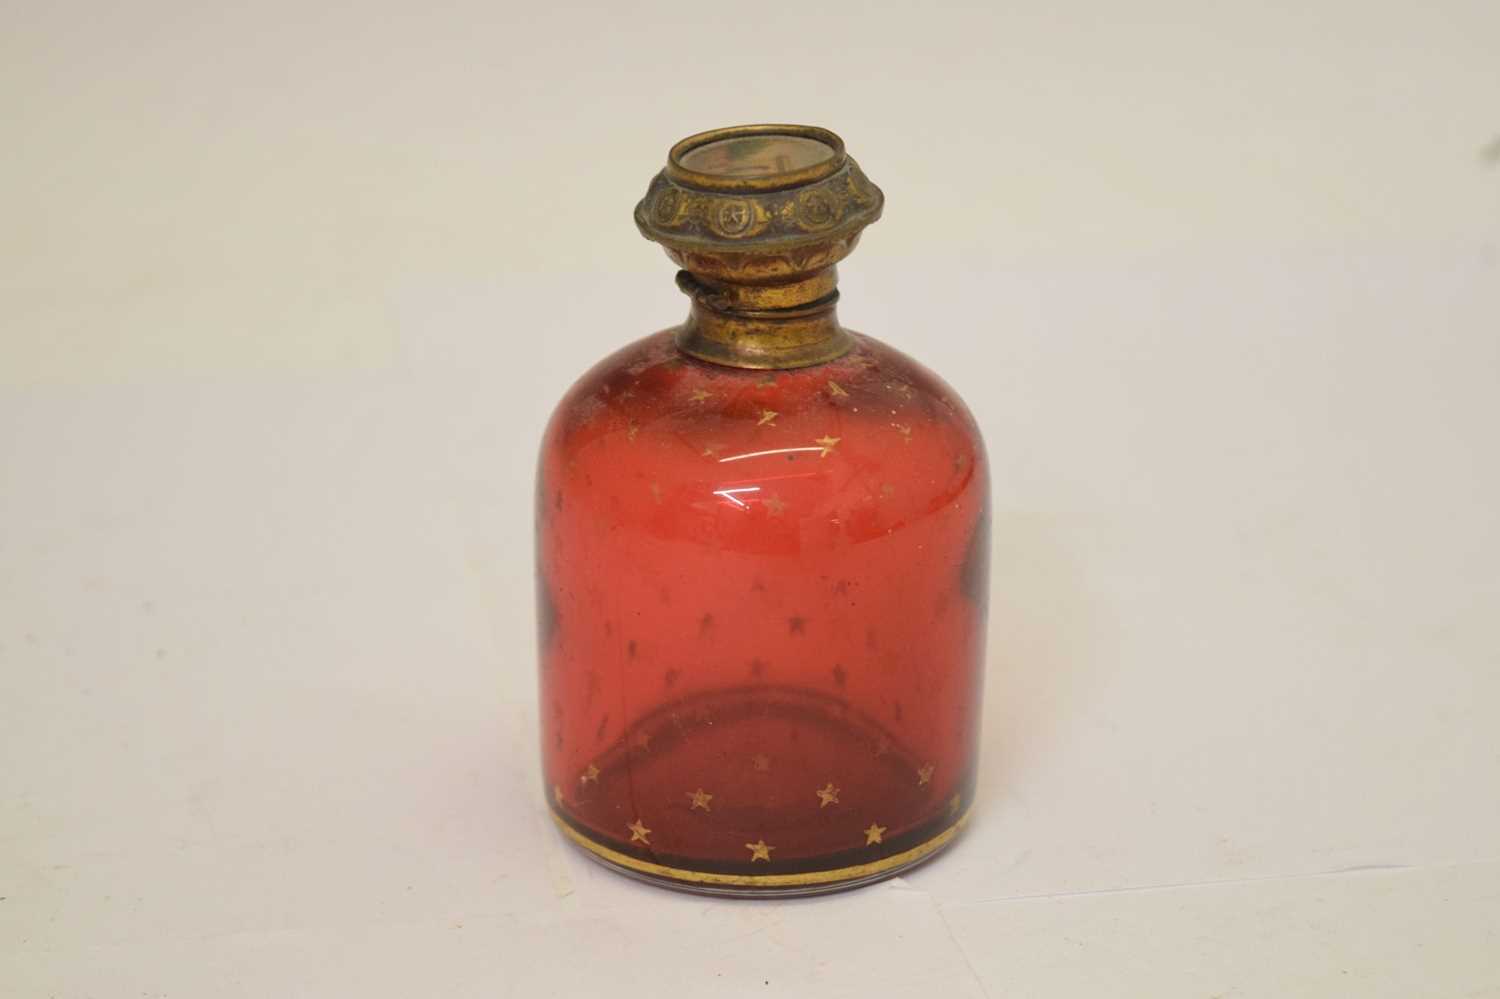 Late 19th century Palais Royal glass bottle - Image 3 of 7